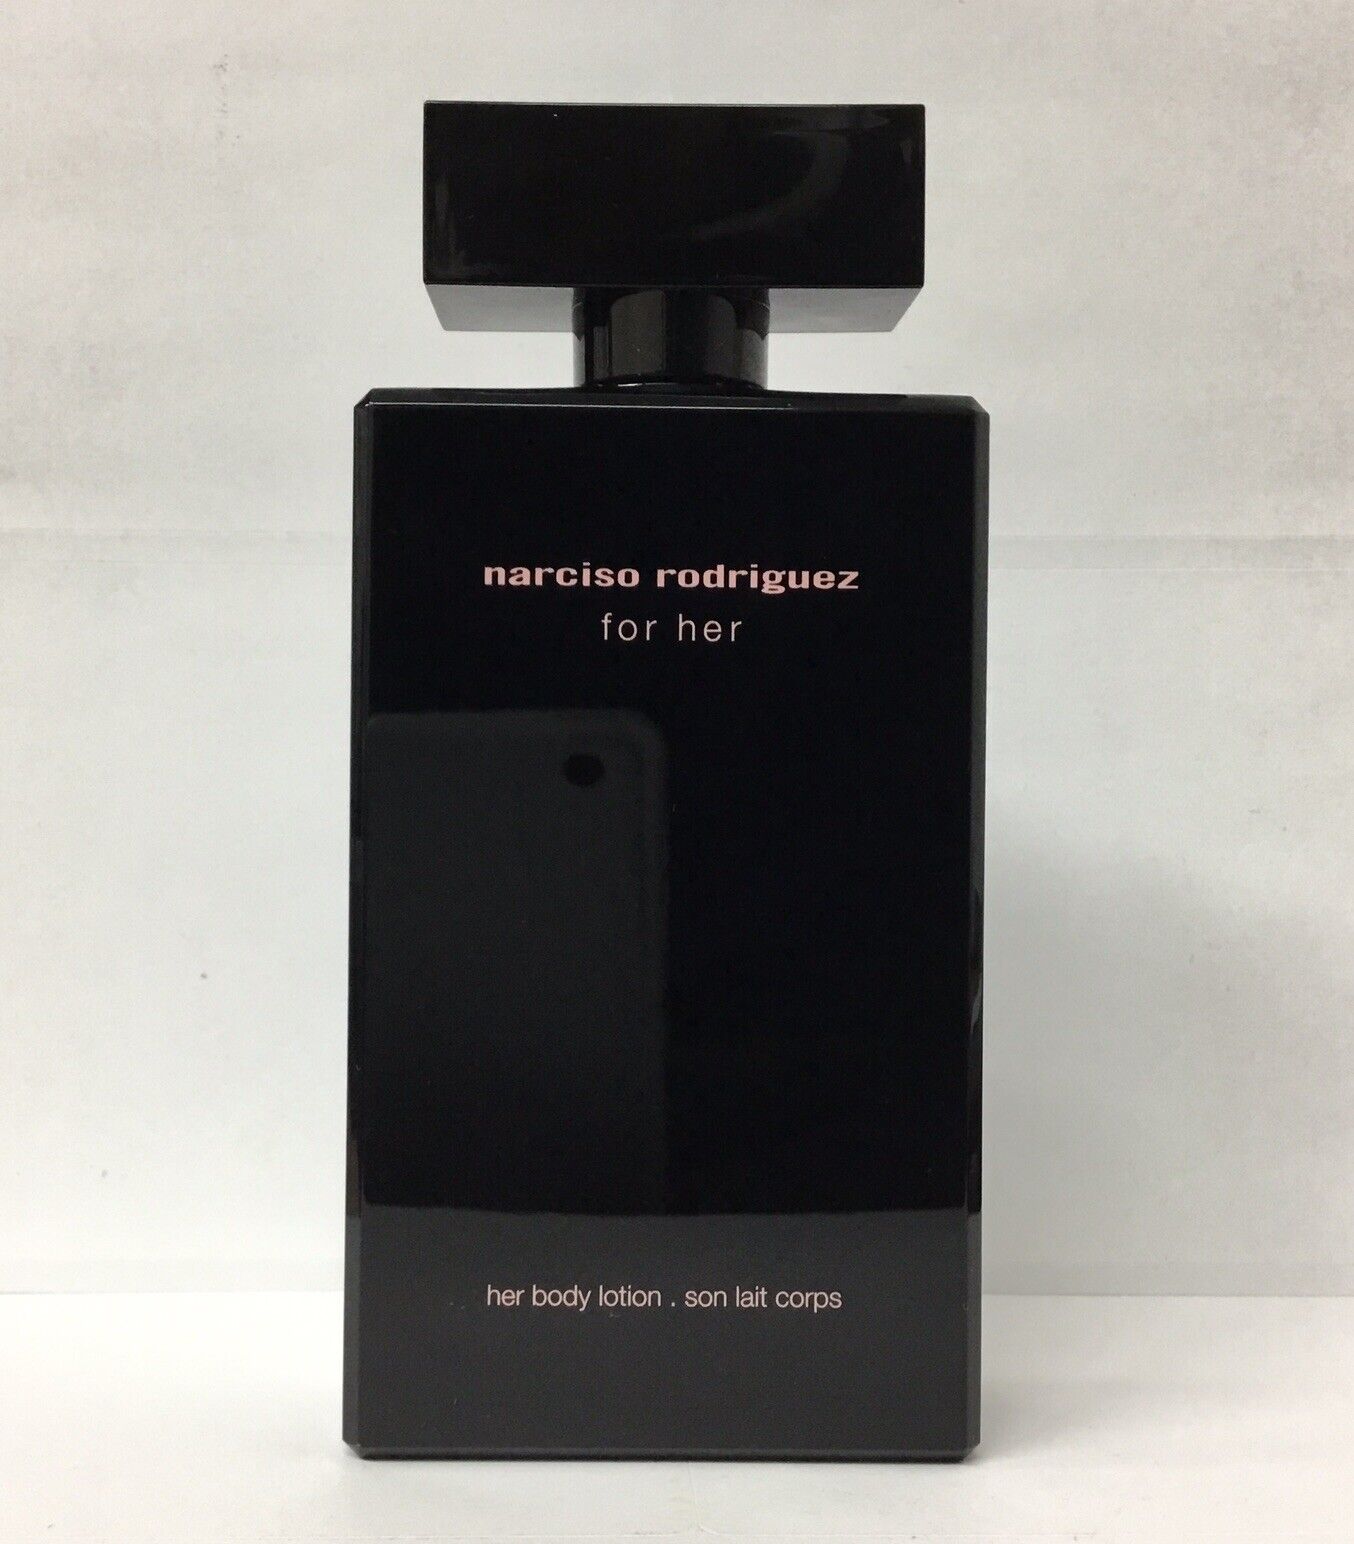 Narciso Rodriguez for Her - Her Body Lotion | 6.7oz | As Pictured 